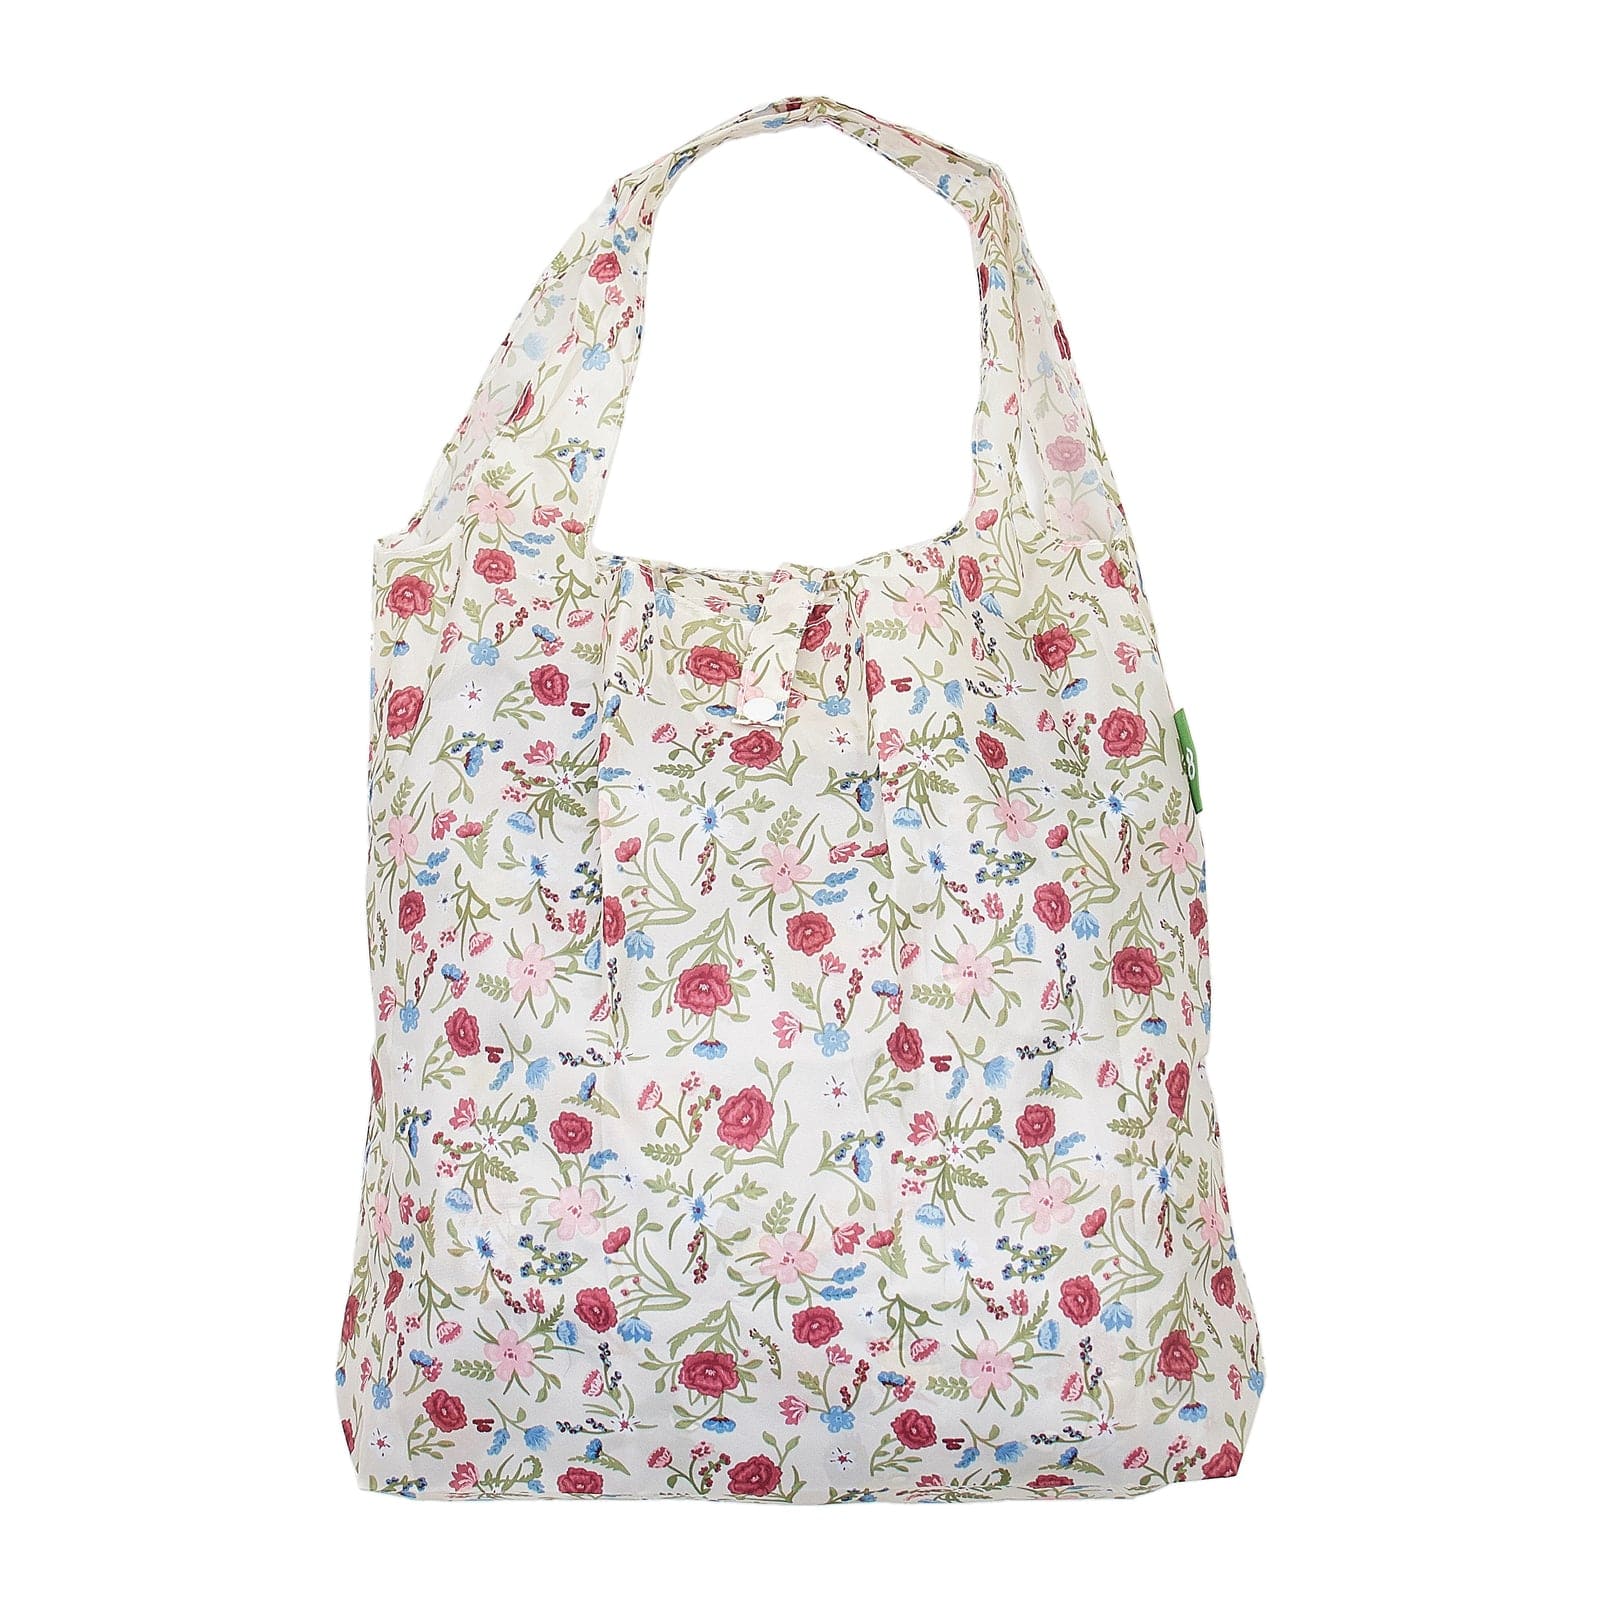 Eco Chic Green Eco Chic Lightweight Foldable Reusable Shopping Bag Floral